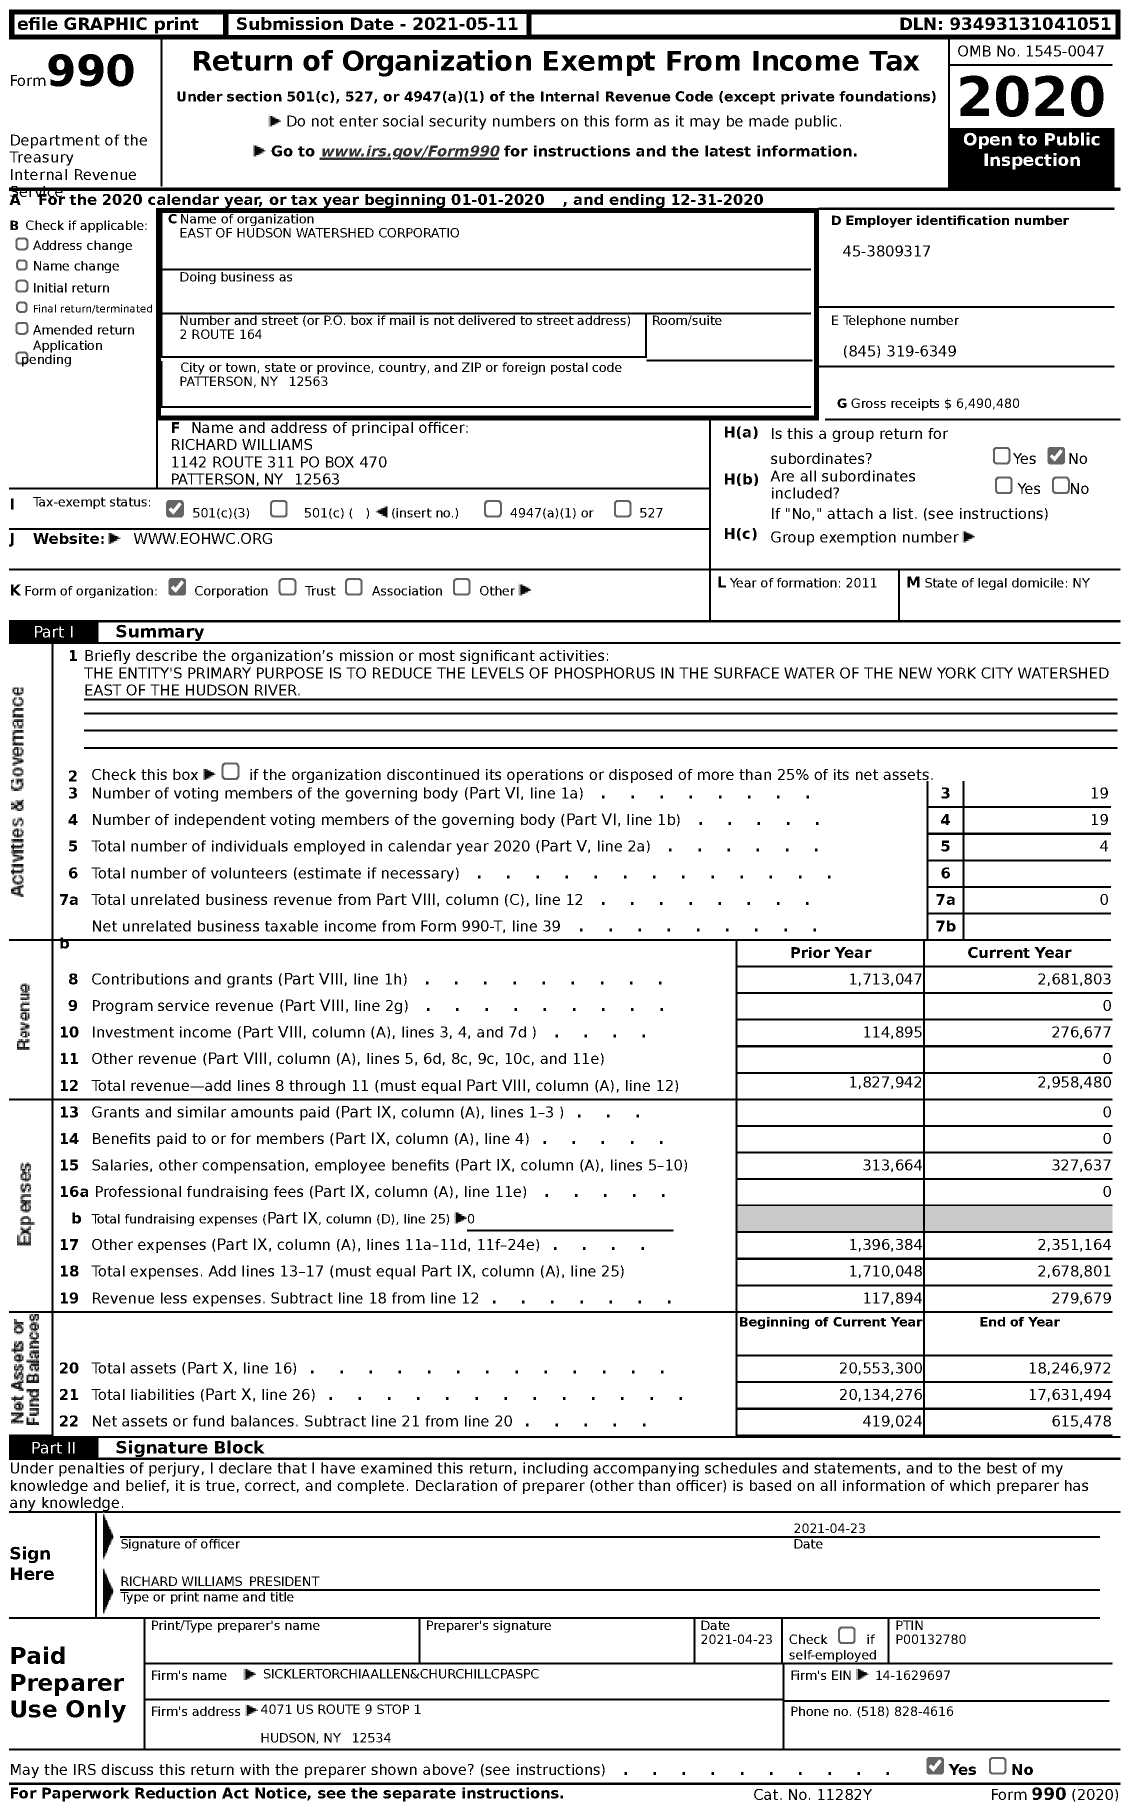 Image of first page of 2020 Form 990 for East of Hudson Watershed Corporation (EOHWC)